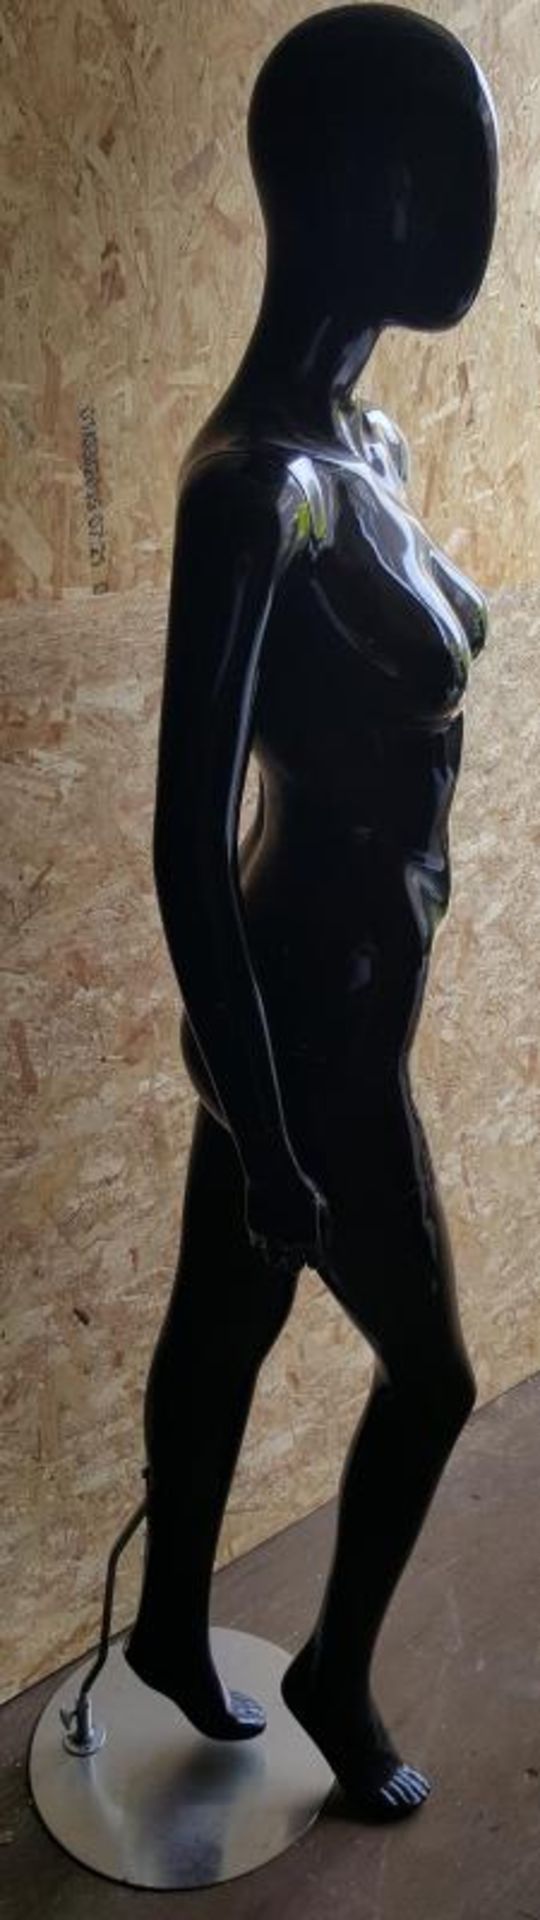 1 x 6ft Female Shop&nbsp;Mannequin With A Gloss Black Finish&nbsp;- Ref BY292 - Dimensions: H183/L40 - Image 2 of 4